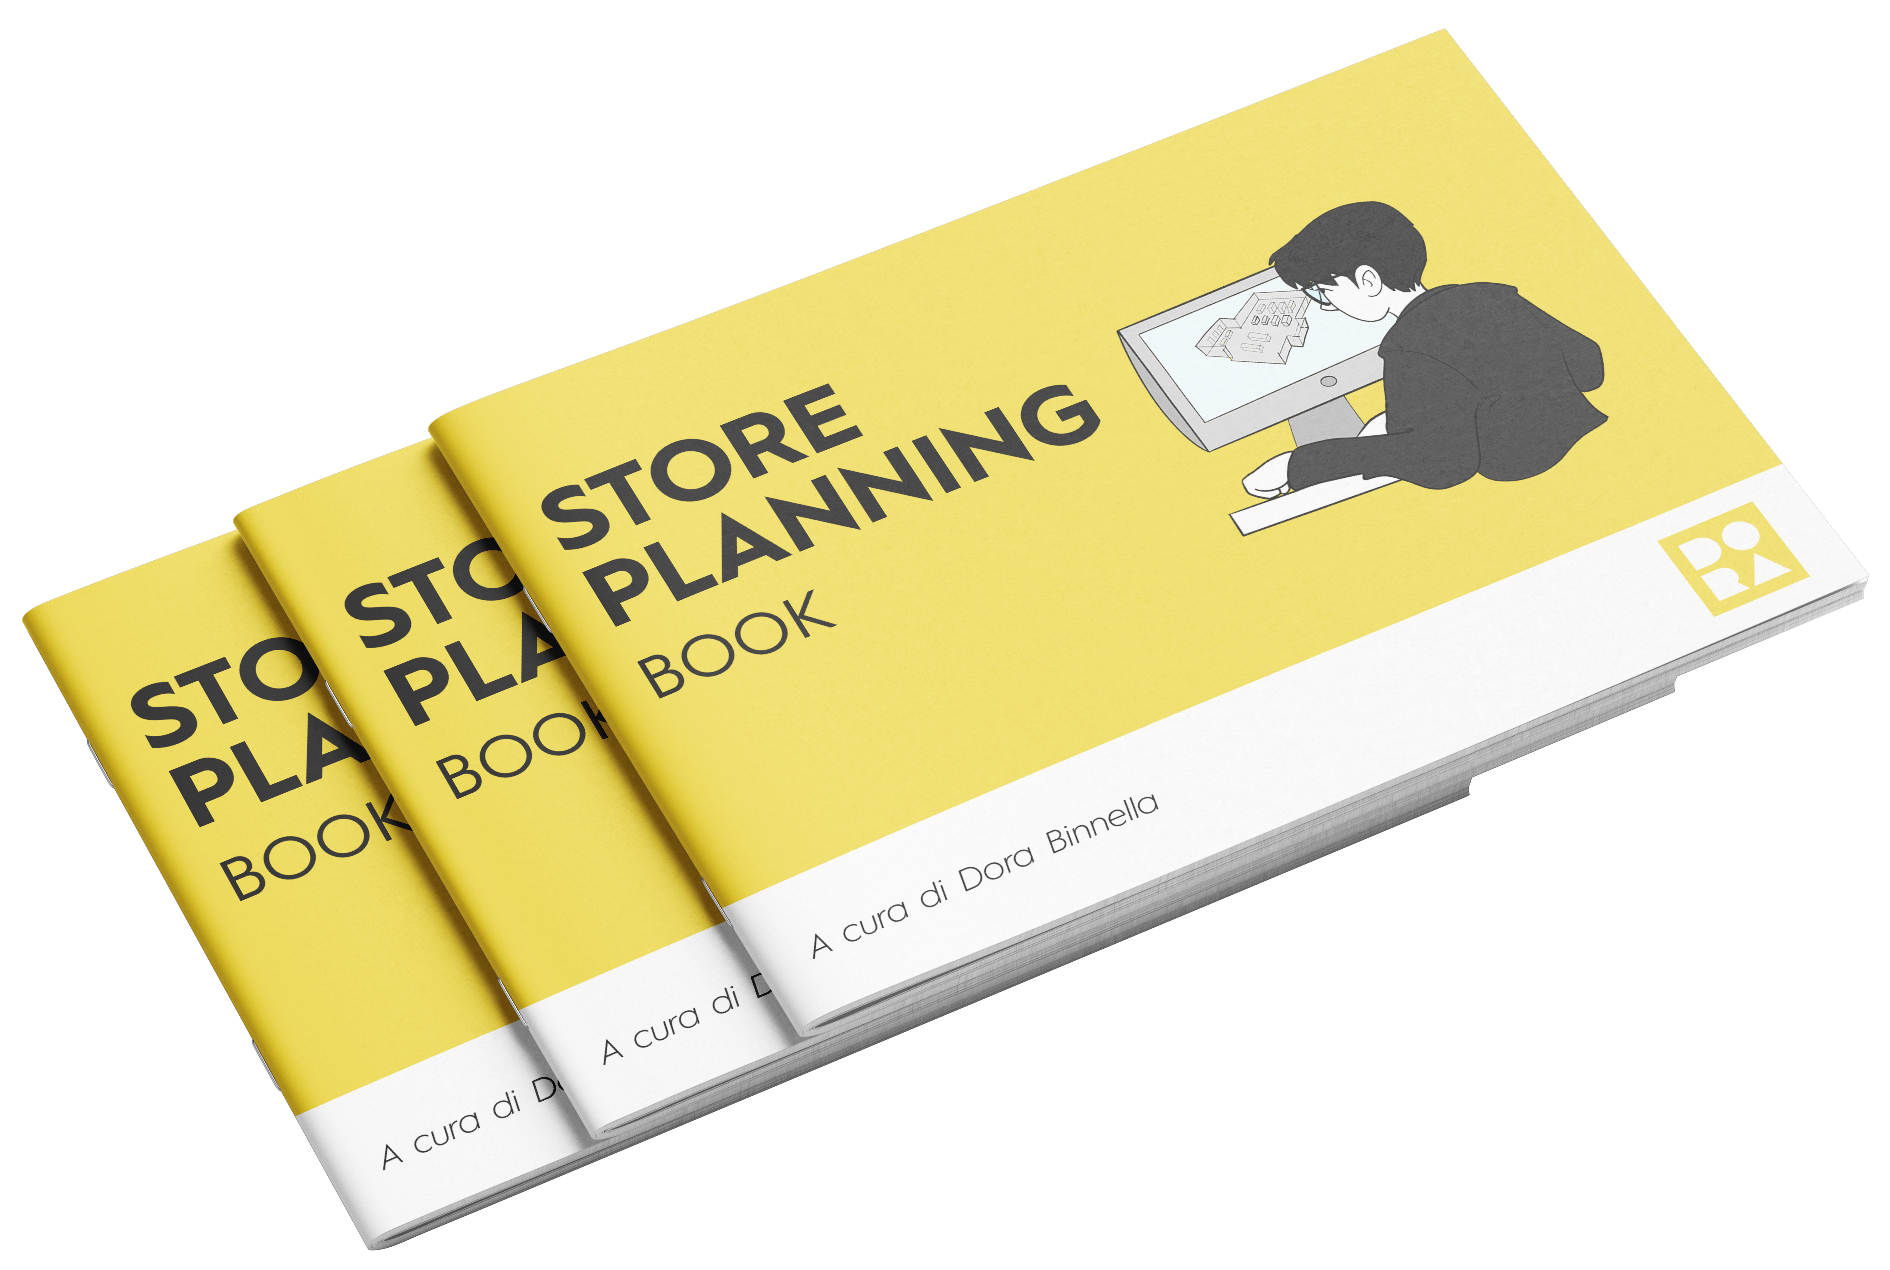 Store-planning-book-visual-book